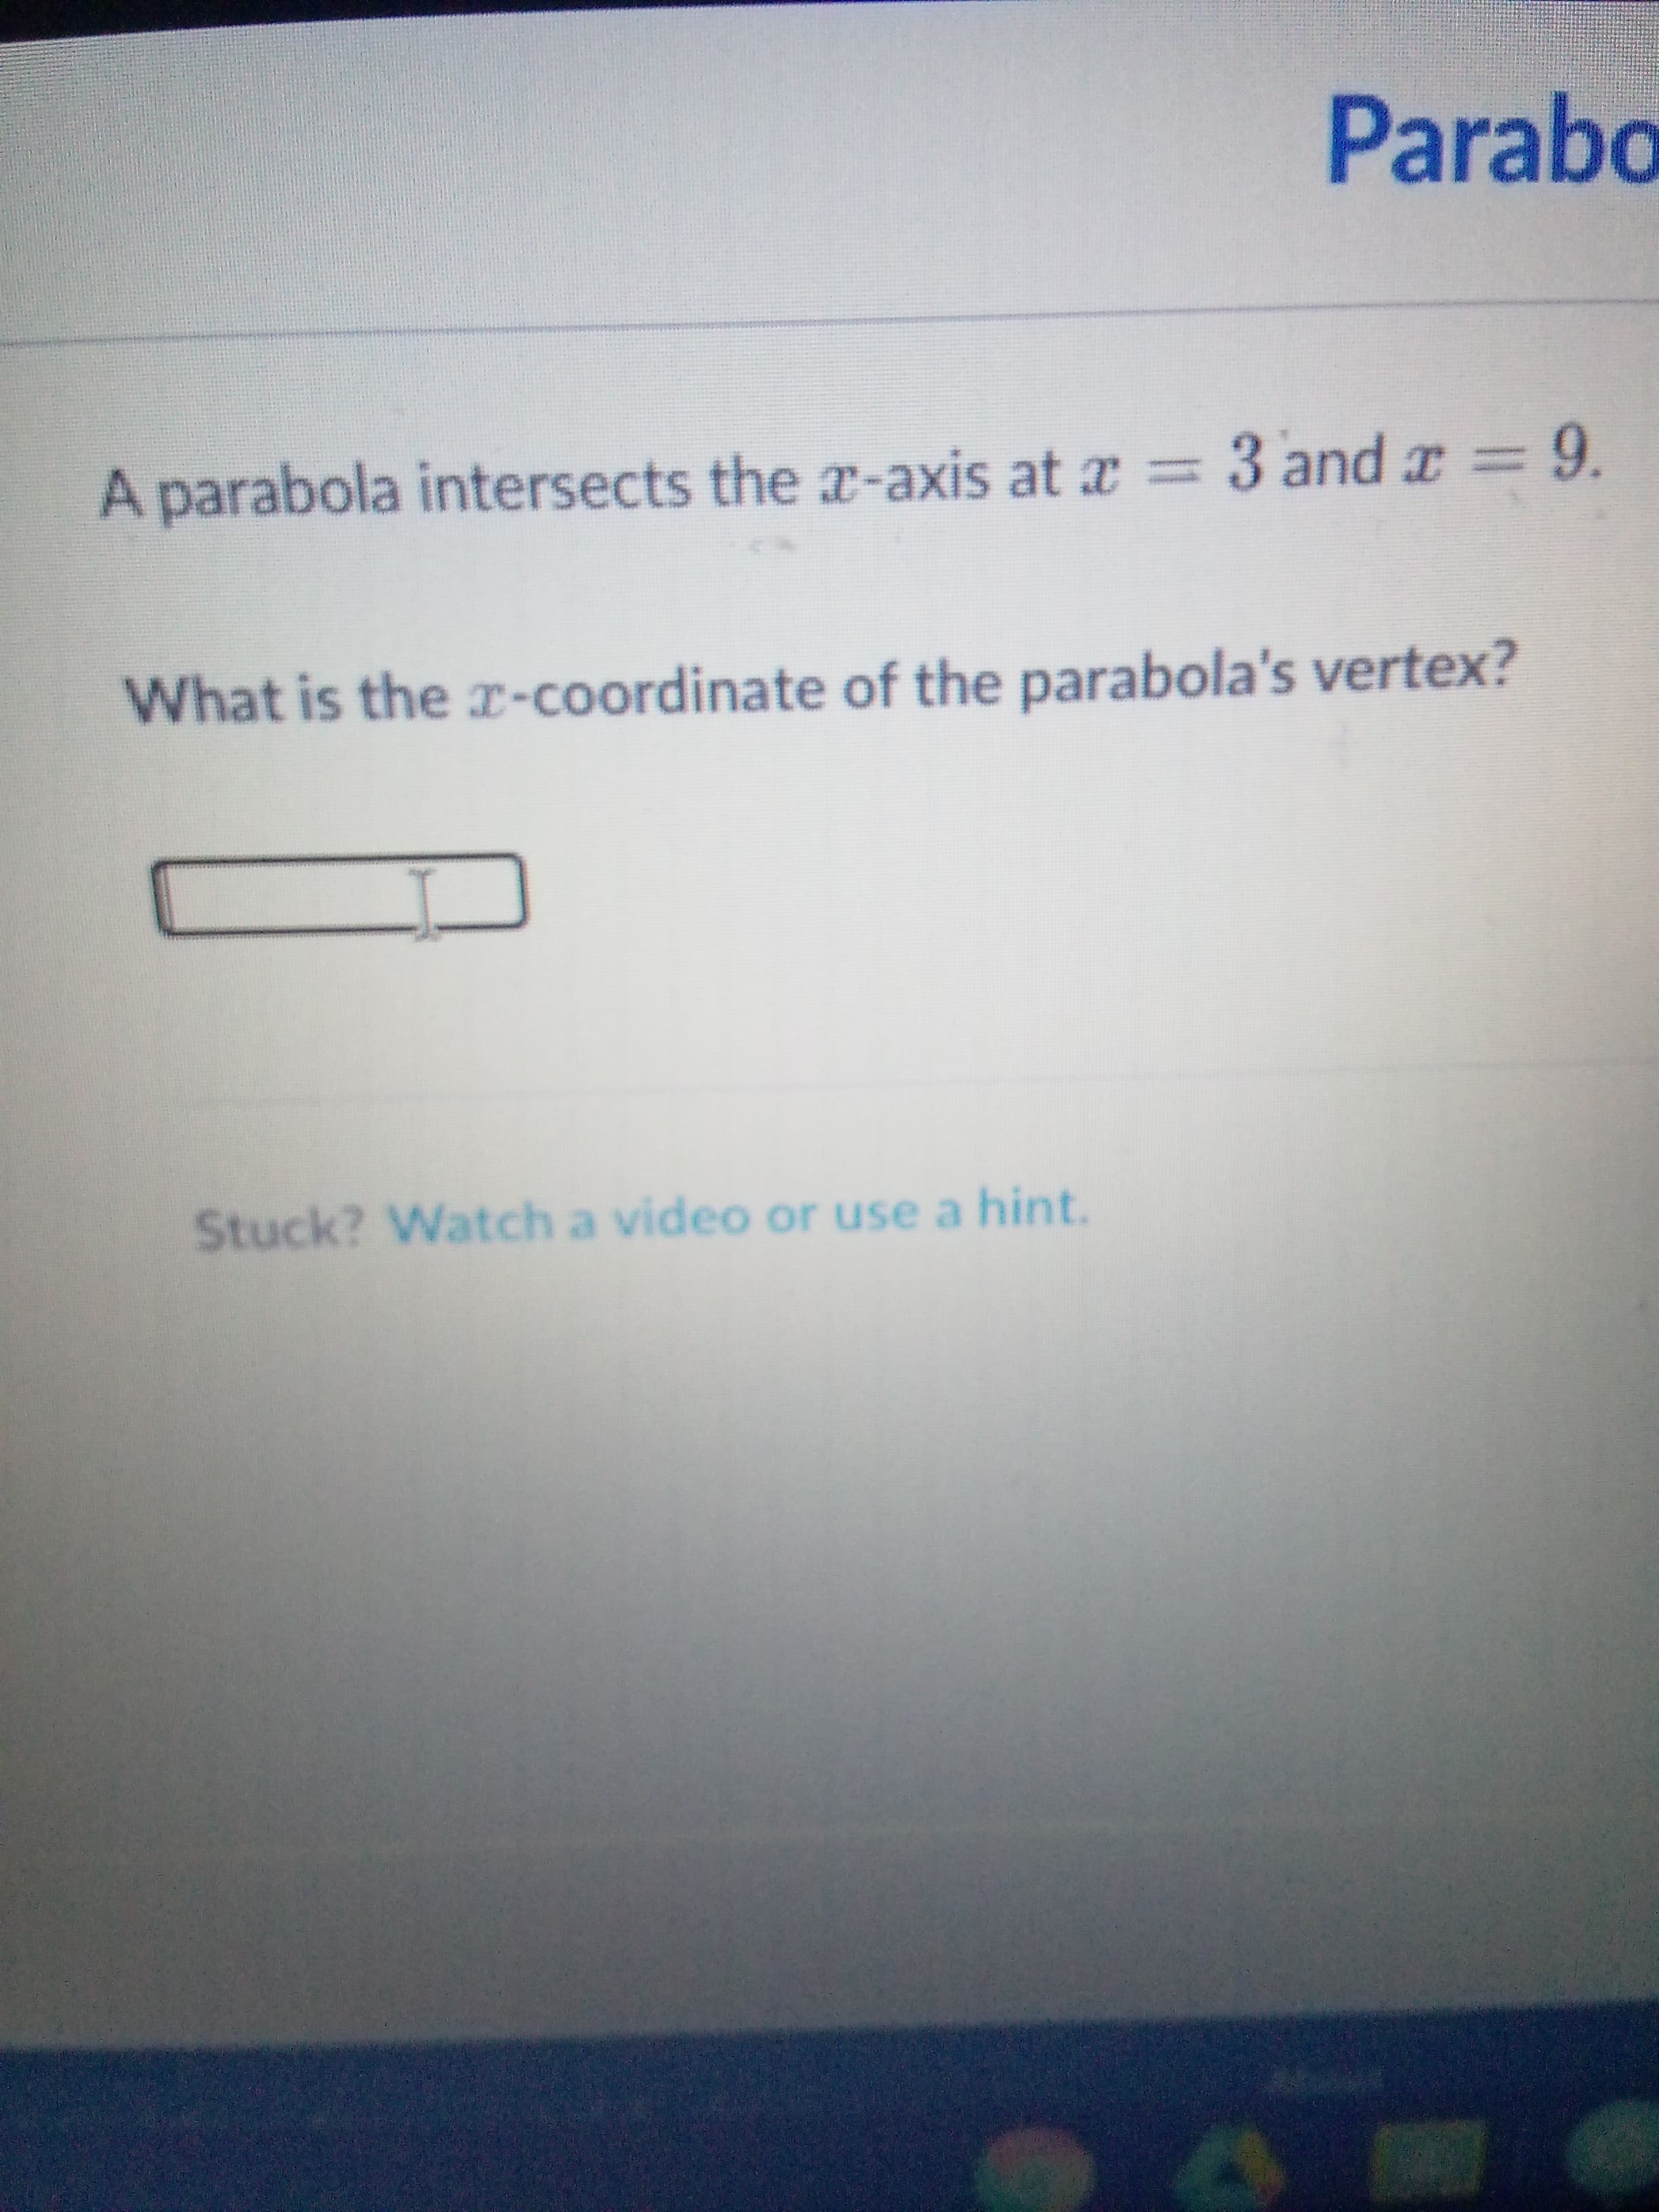 A parabola intersects the x-axis at x = 3 and r = 9.
What is the -coordinate of the parabola's vertex?
